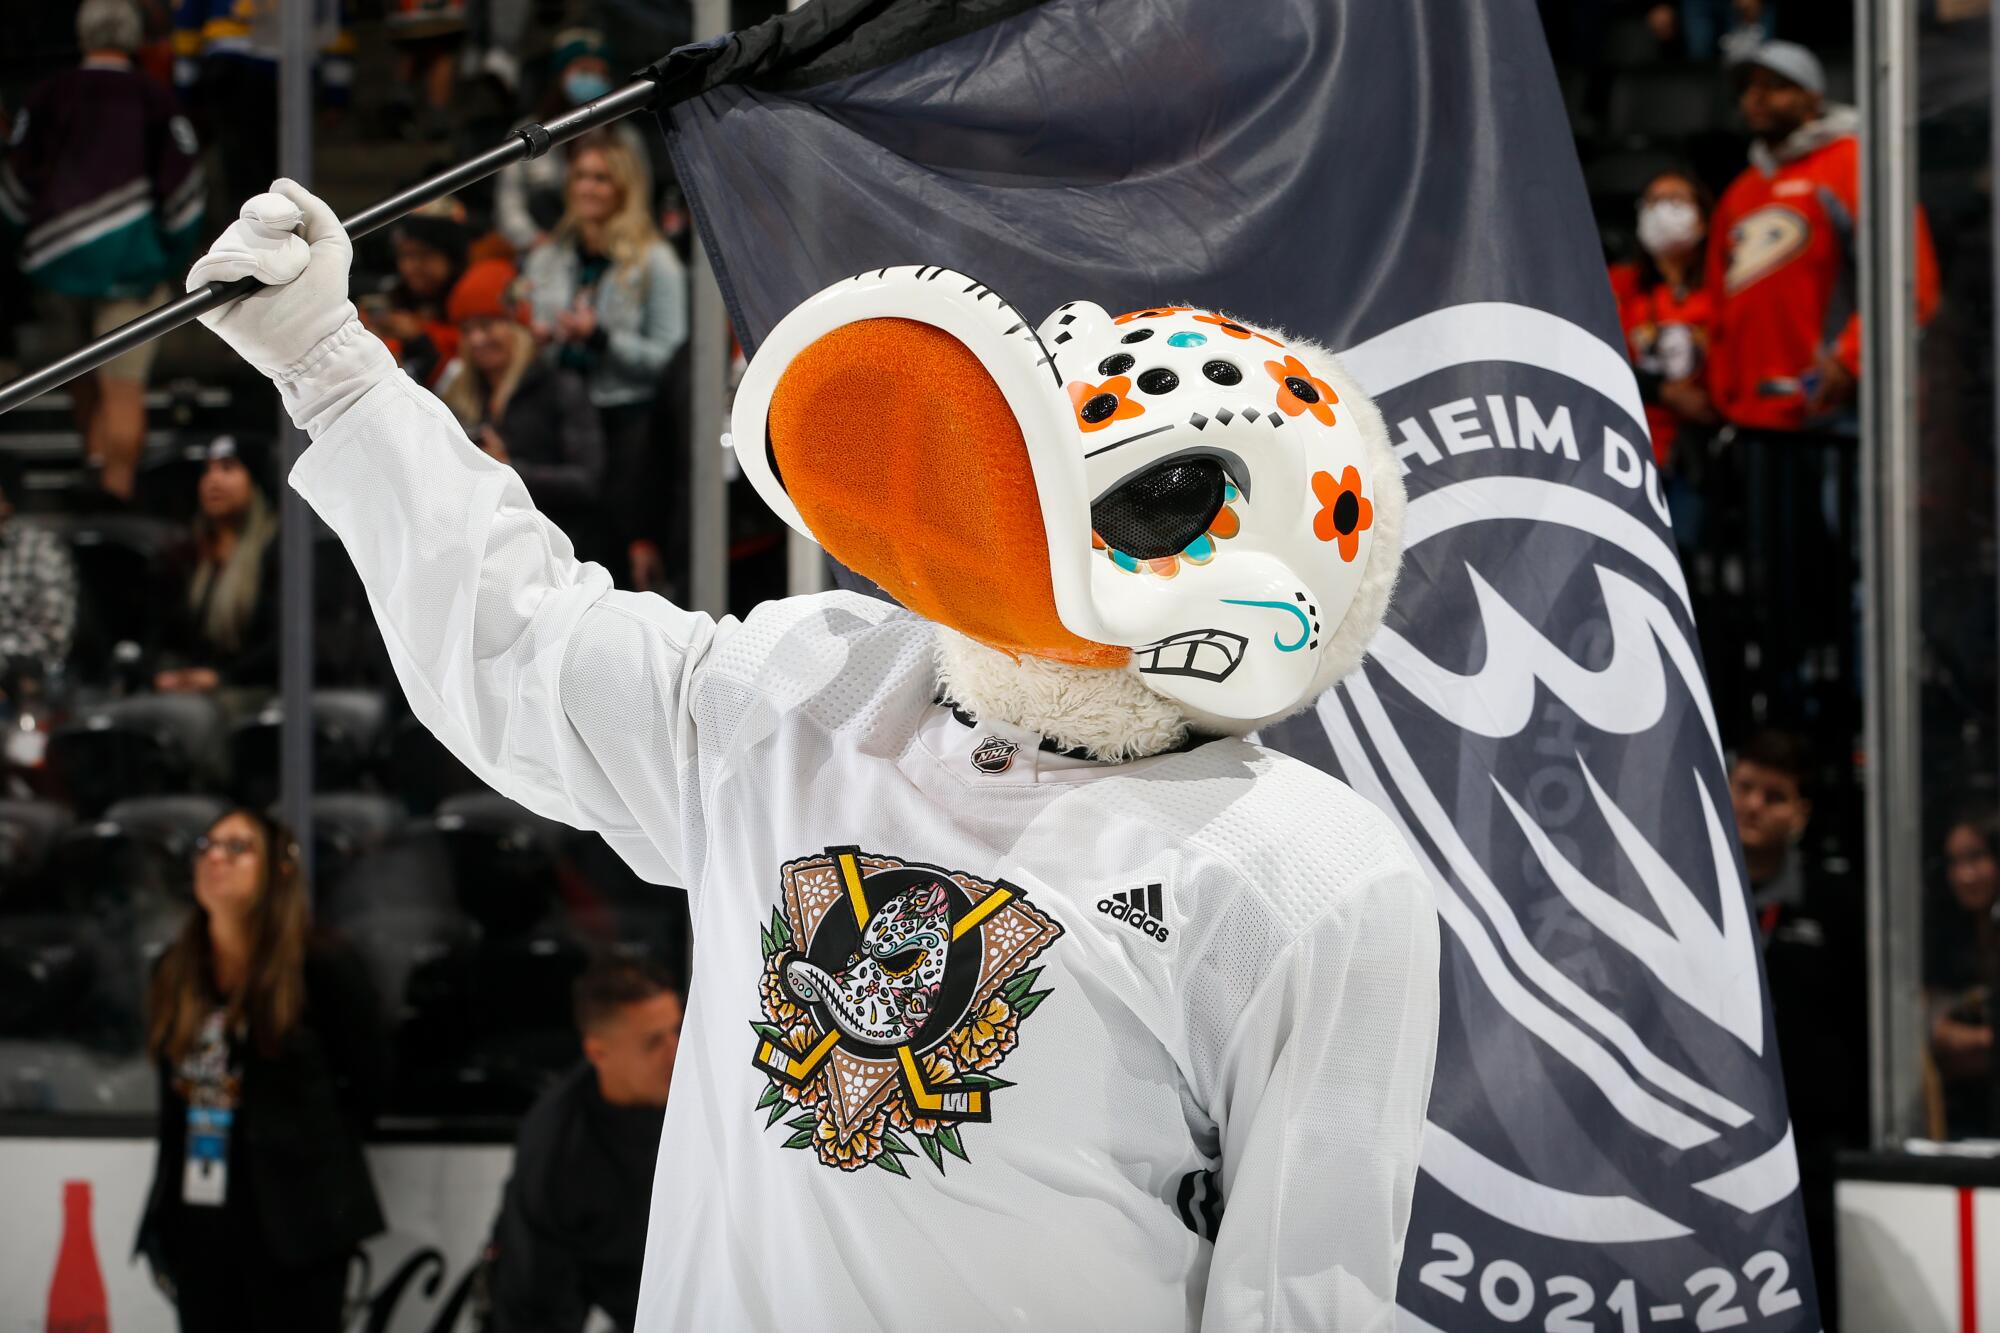 Anaheim Ducks mascot Wild Wing celebrates Día de los Muertos night, with the duck face decorated like a skull 